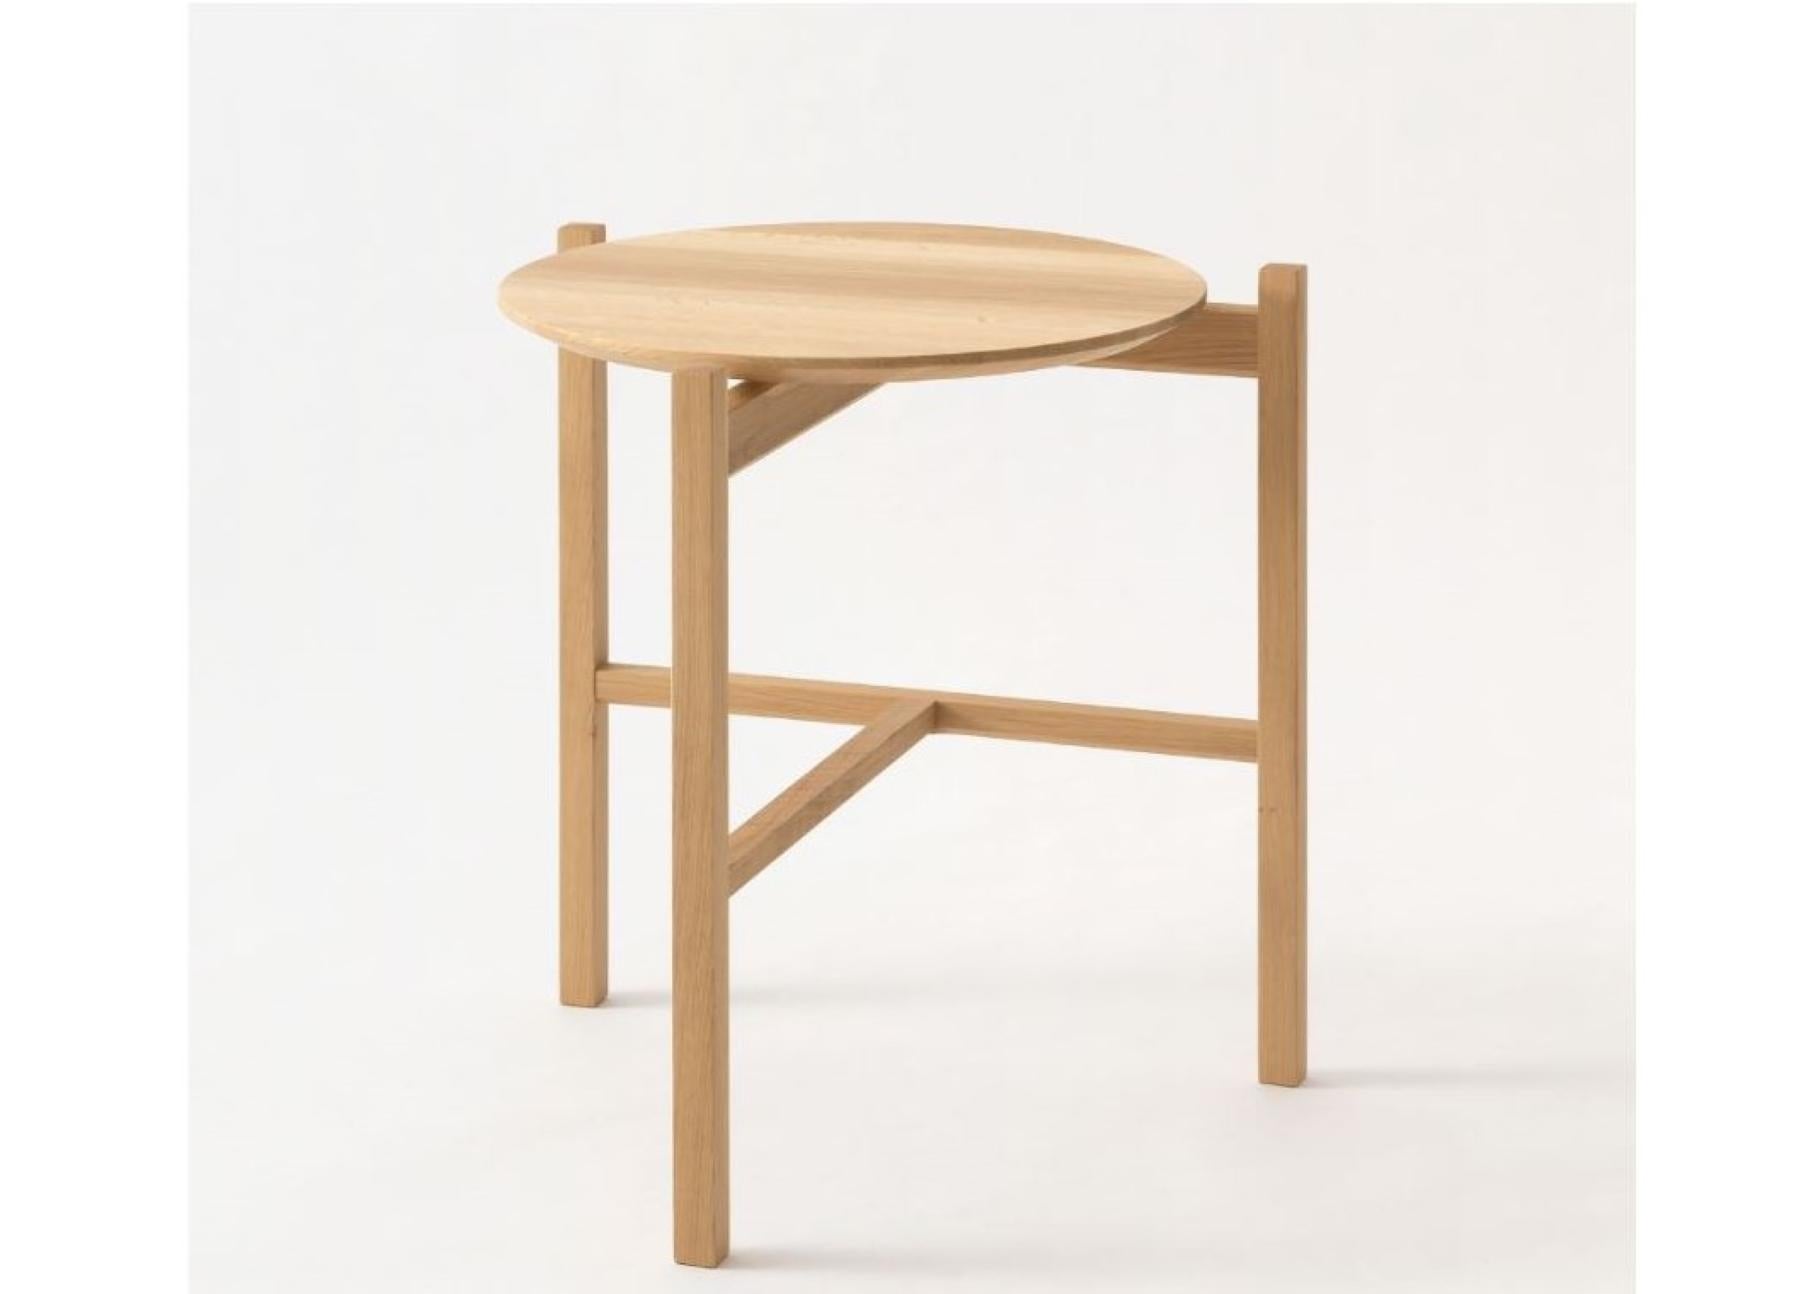 Hand crafted Occasional Side Table by HIDA Japan.  The Suwari series is designed with an awareness of vertical flow, blending naturally into both Japanese and modern architectural spaces, and enhancing them.
The perfectly weighted design and form of